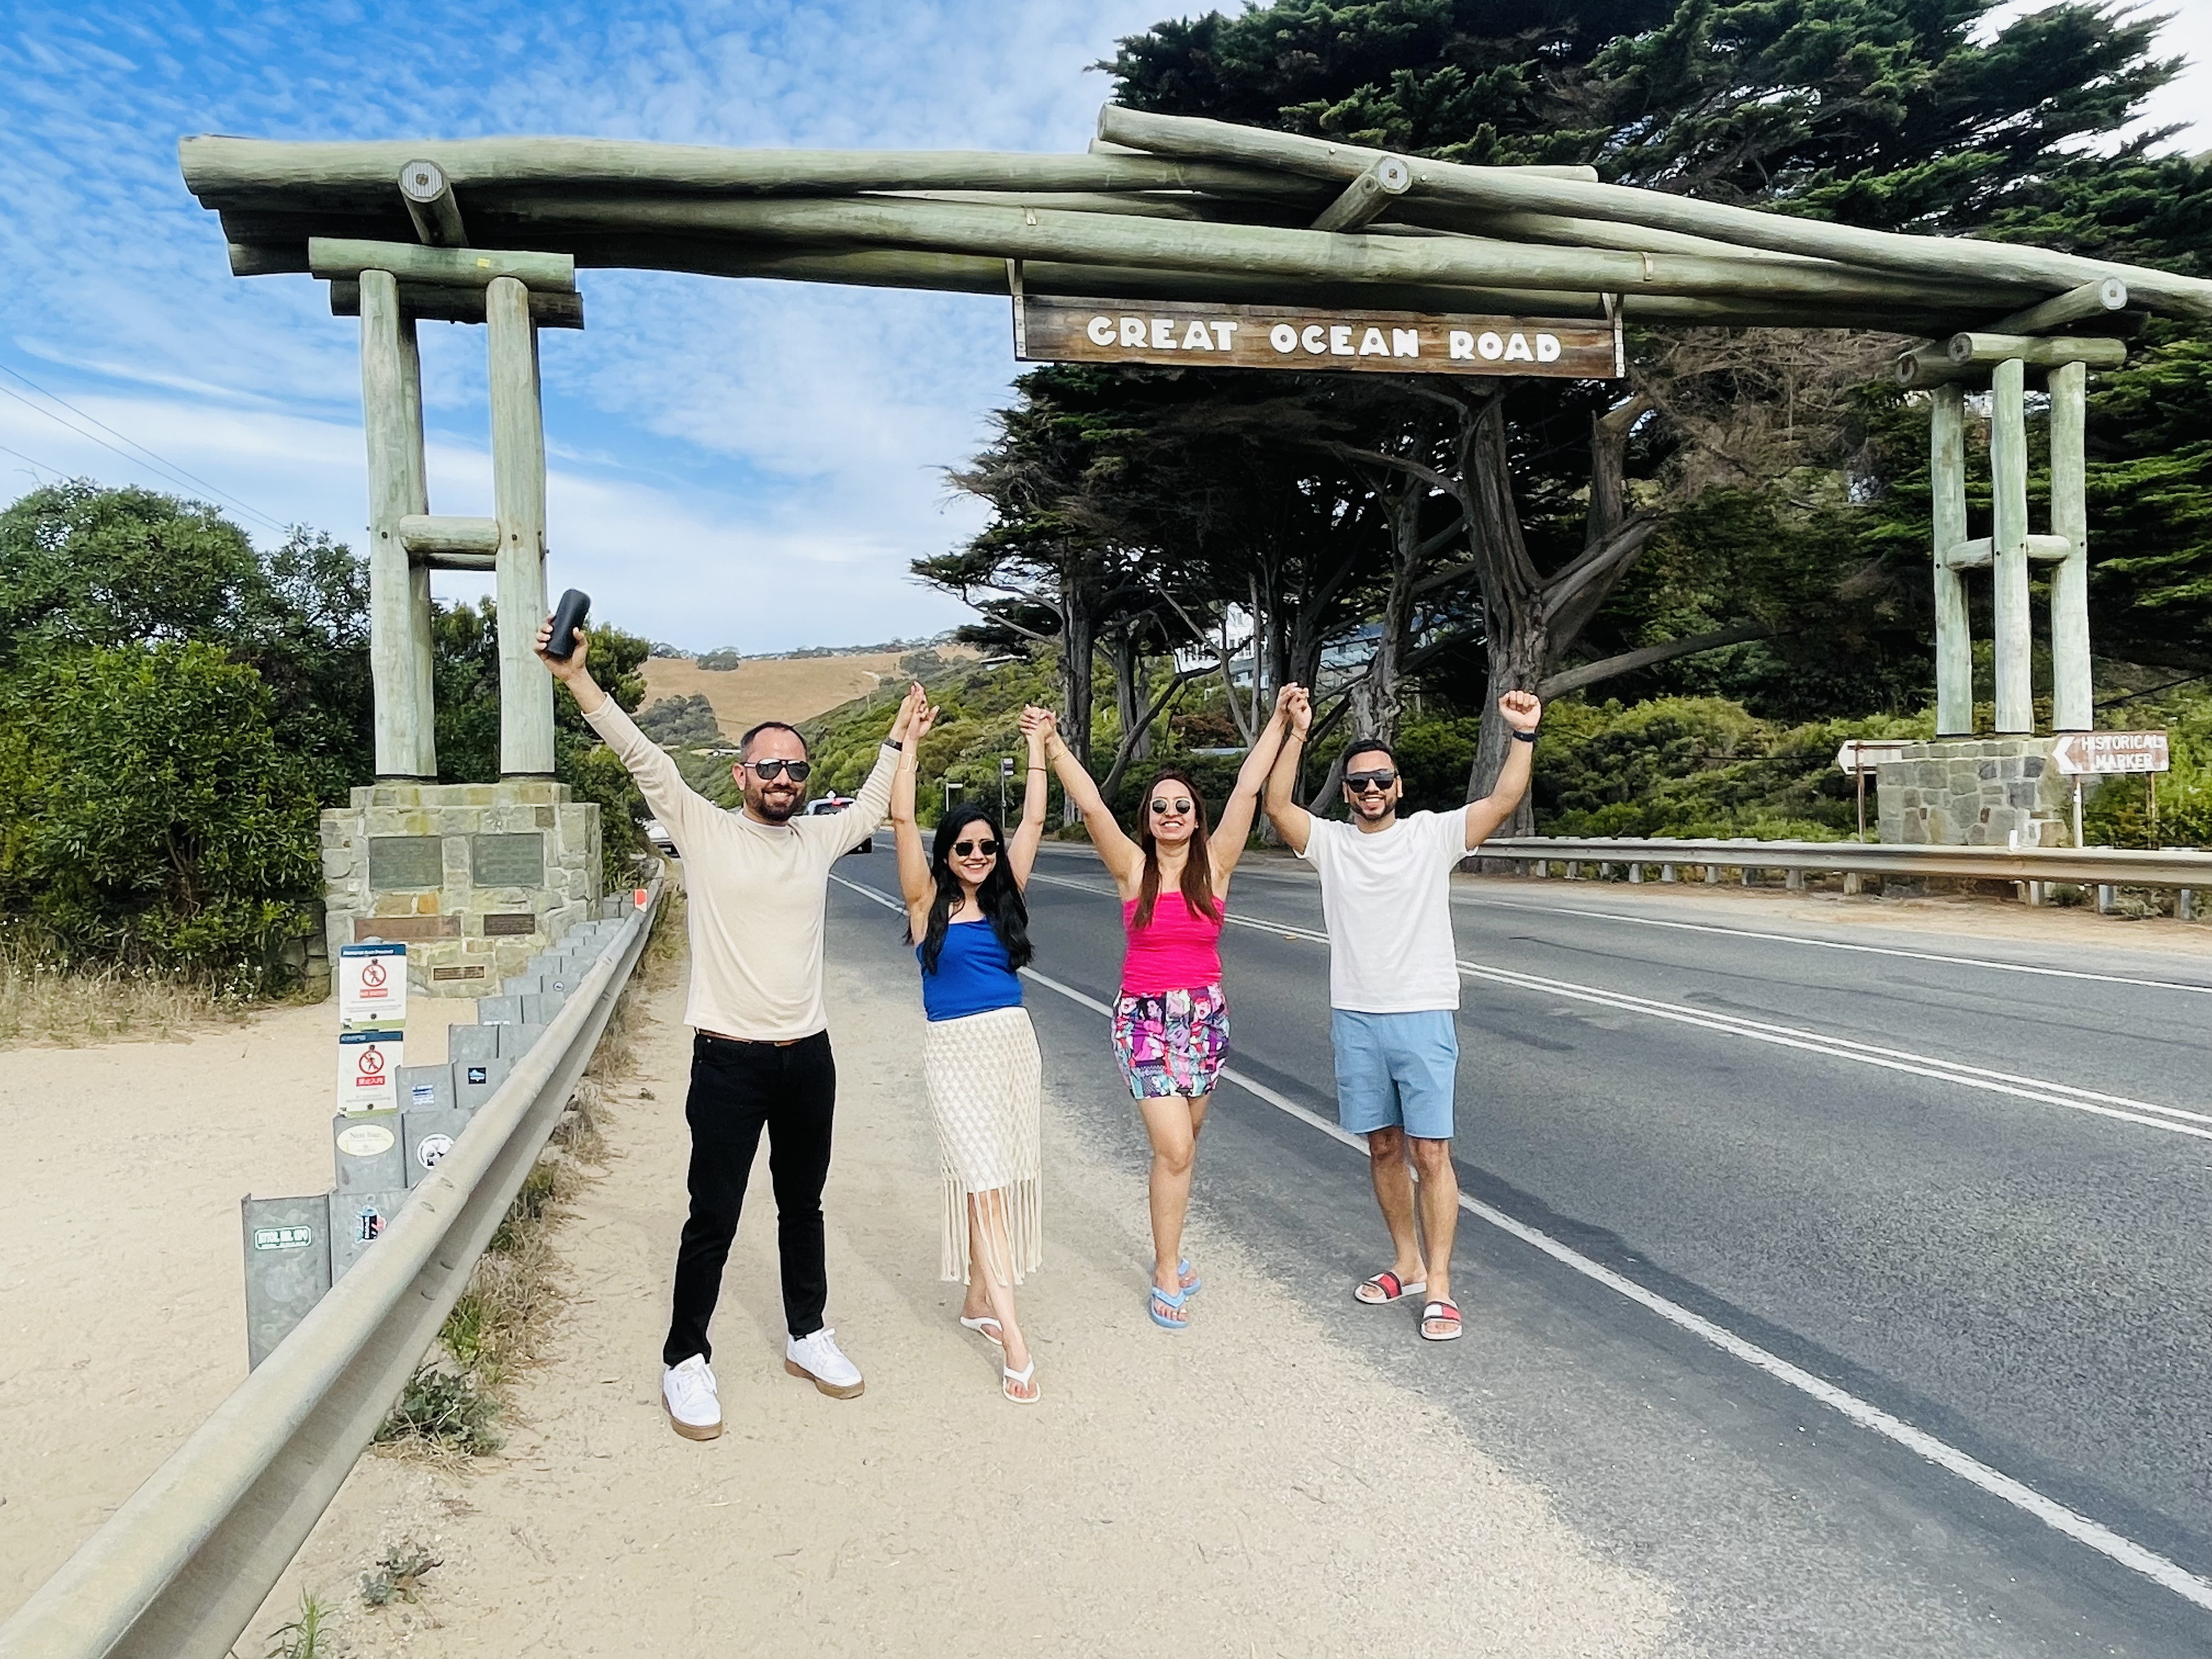 A Memorable Day Tour along the Great Ocean Road: Exploring Nature